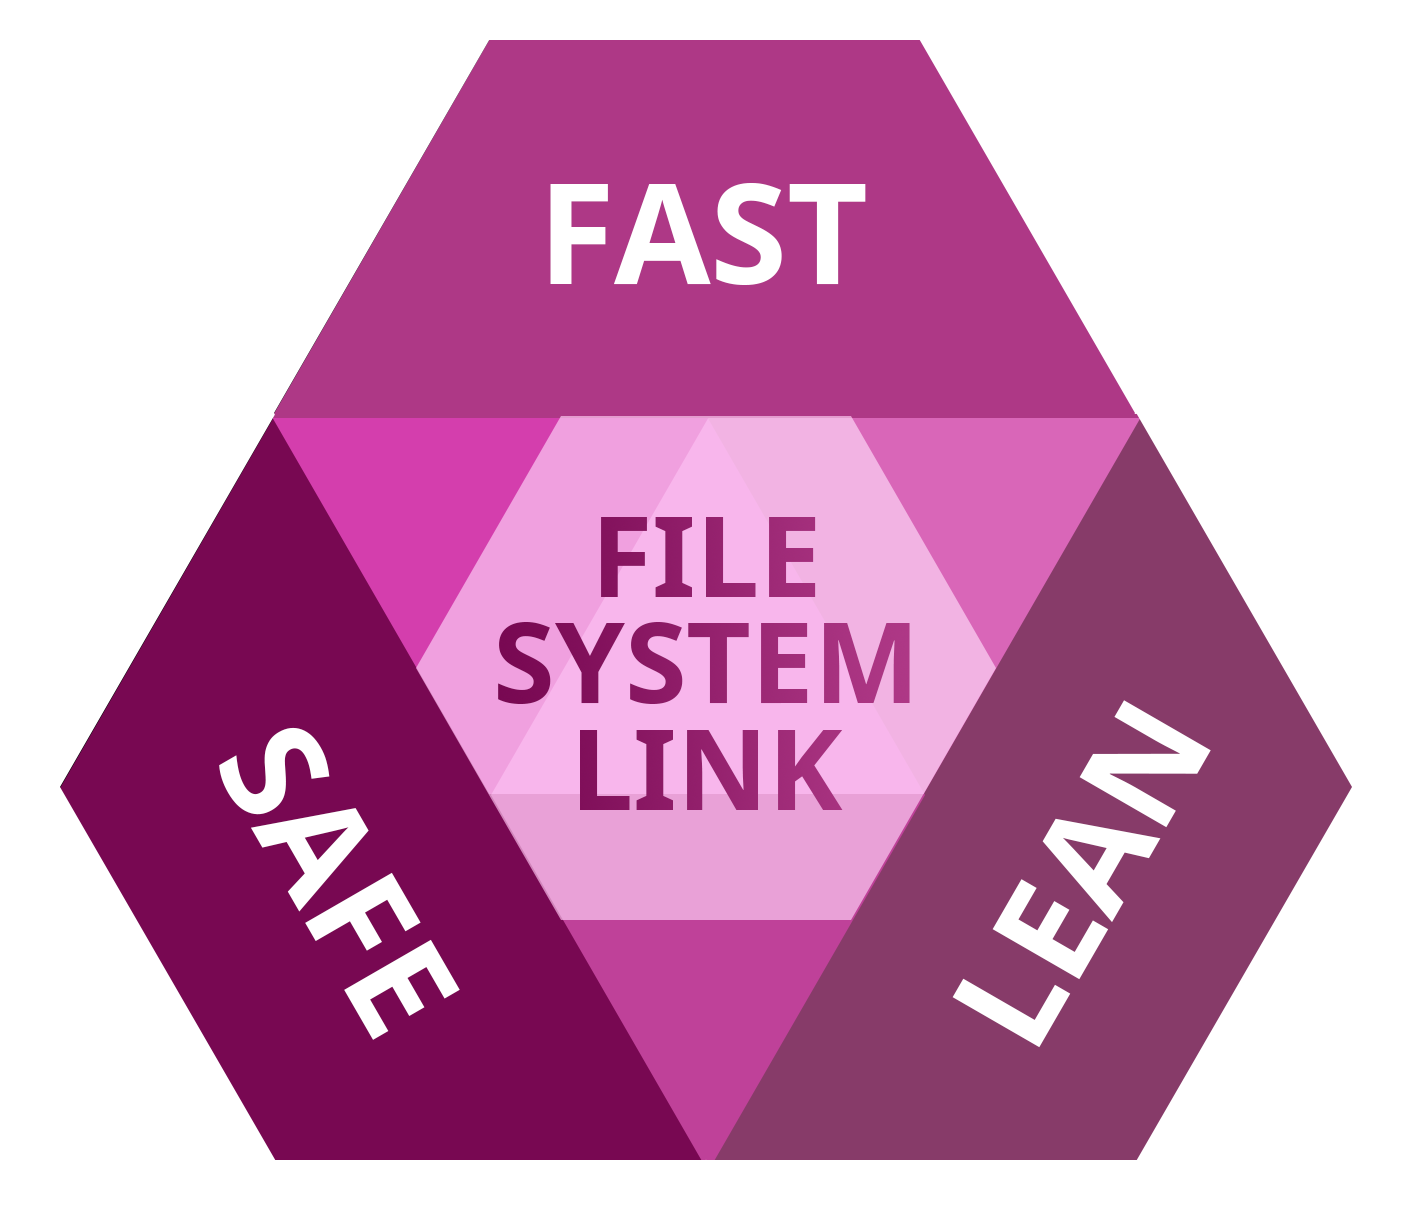 Paragon File System Link: Fast, Safe, Lean. Pick all three. APFS and Mac.